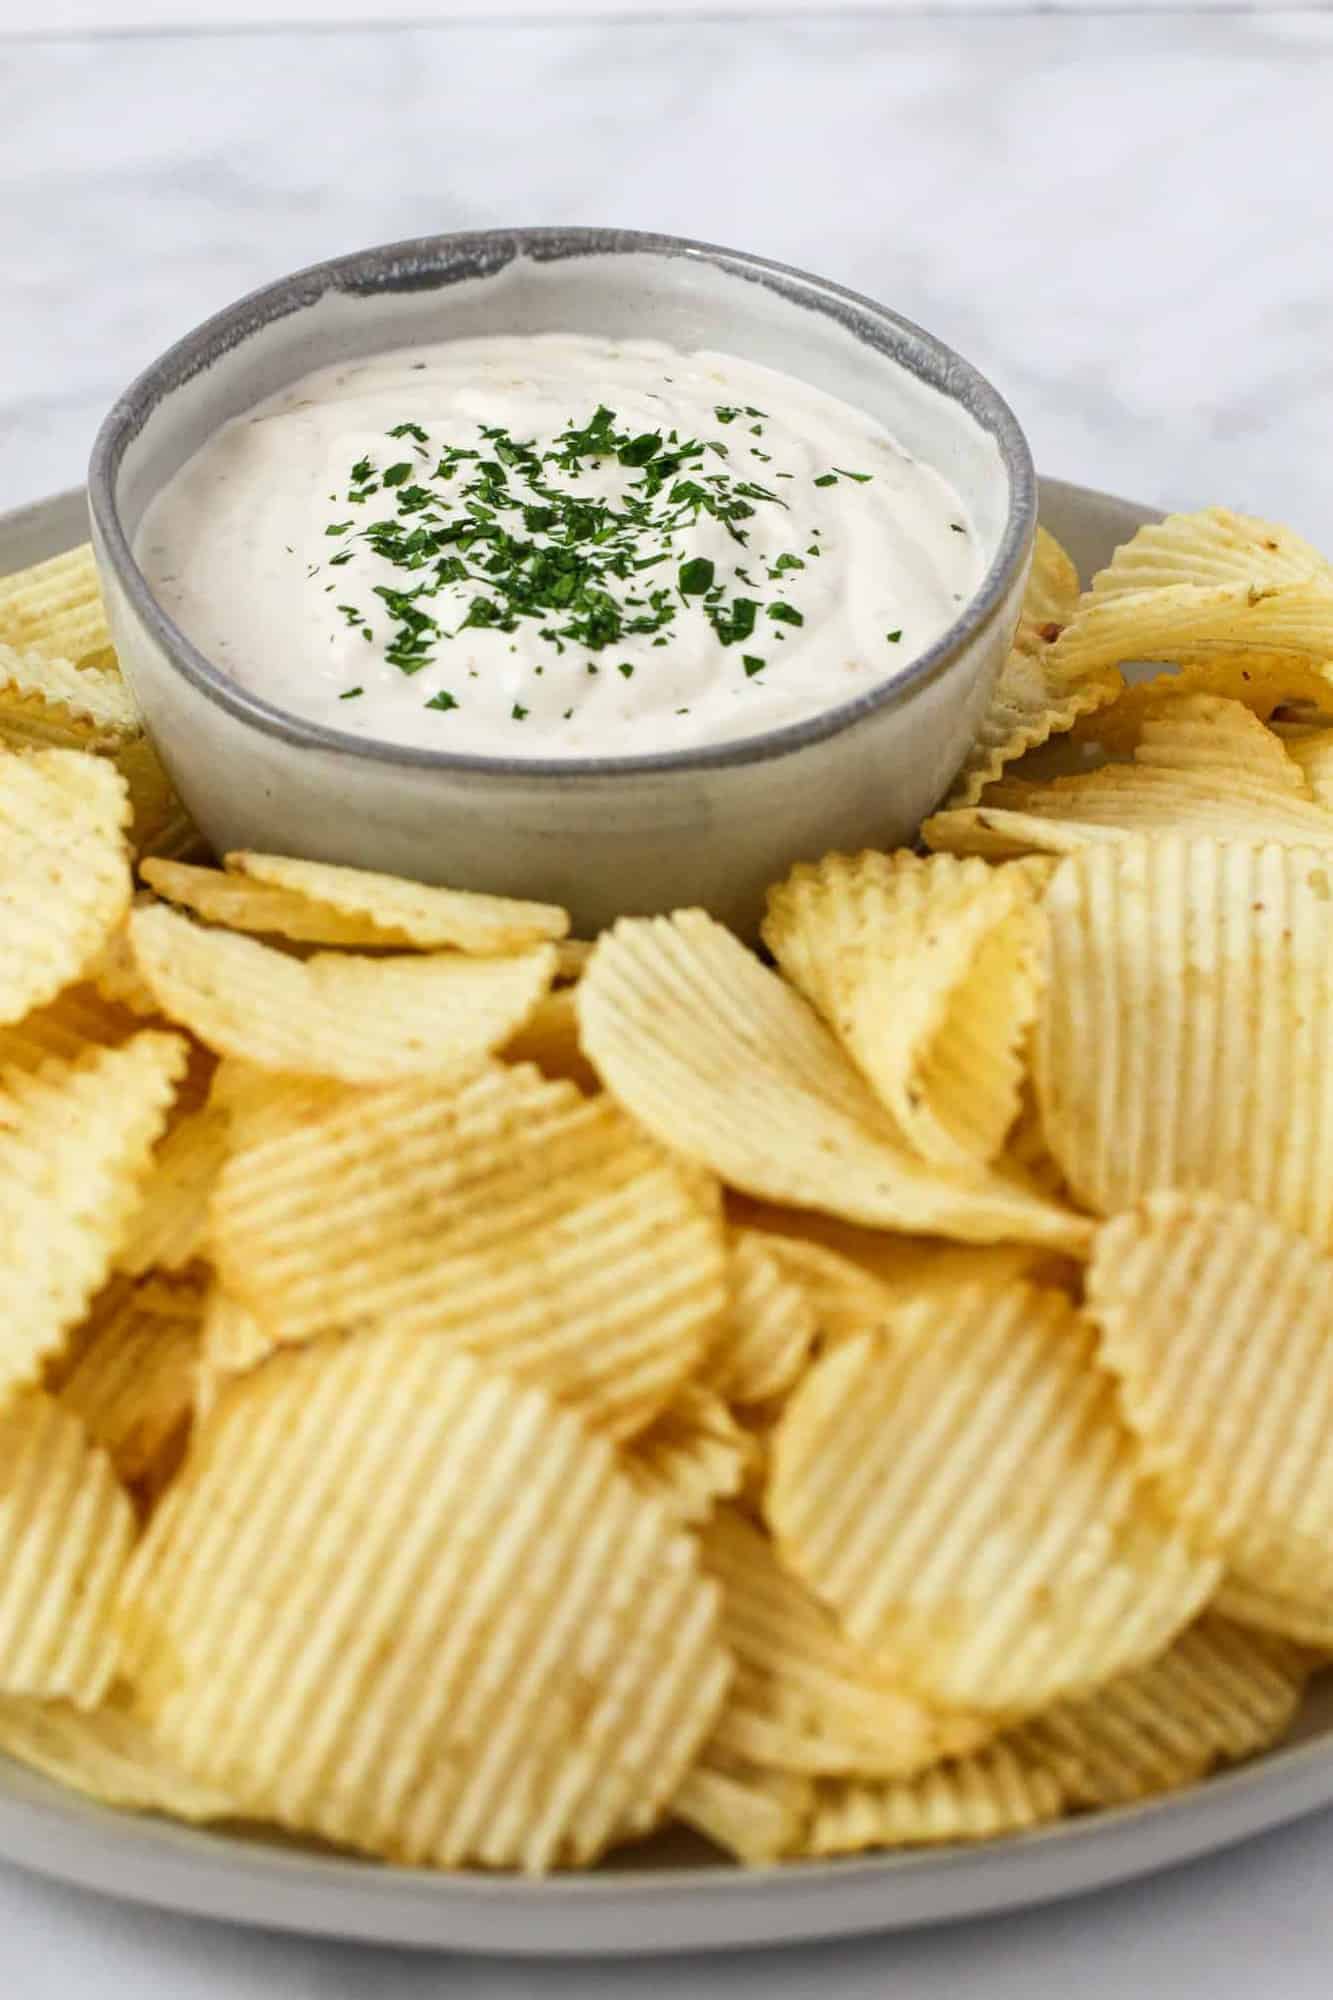 Sour Cream and Onion Dip shown served on a platter with potato chips.